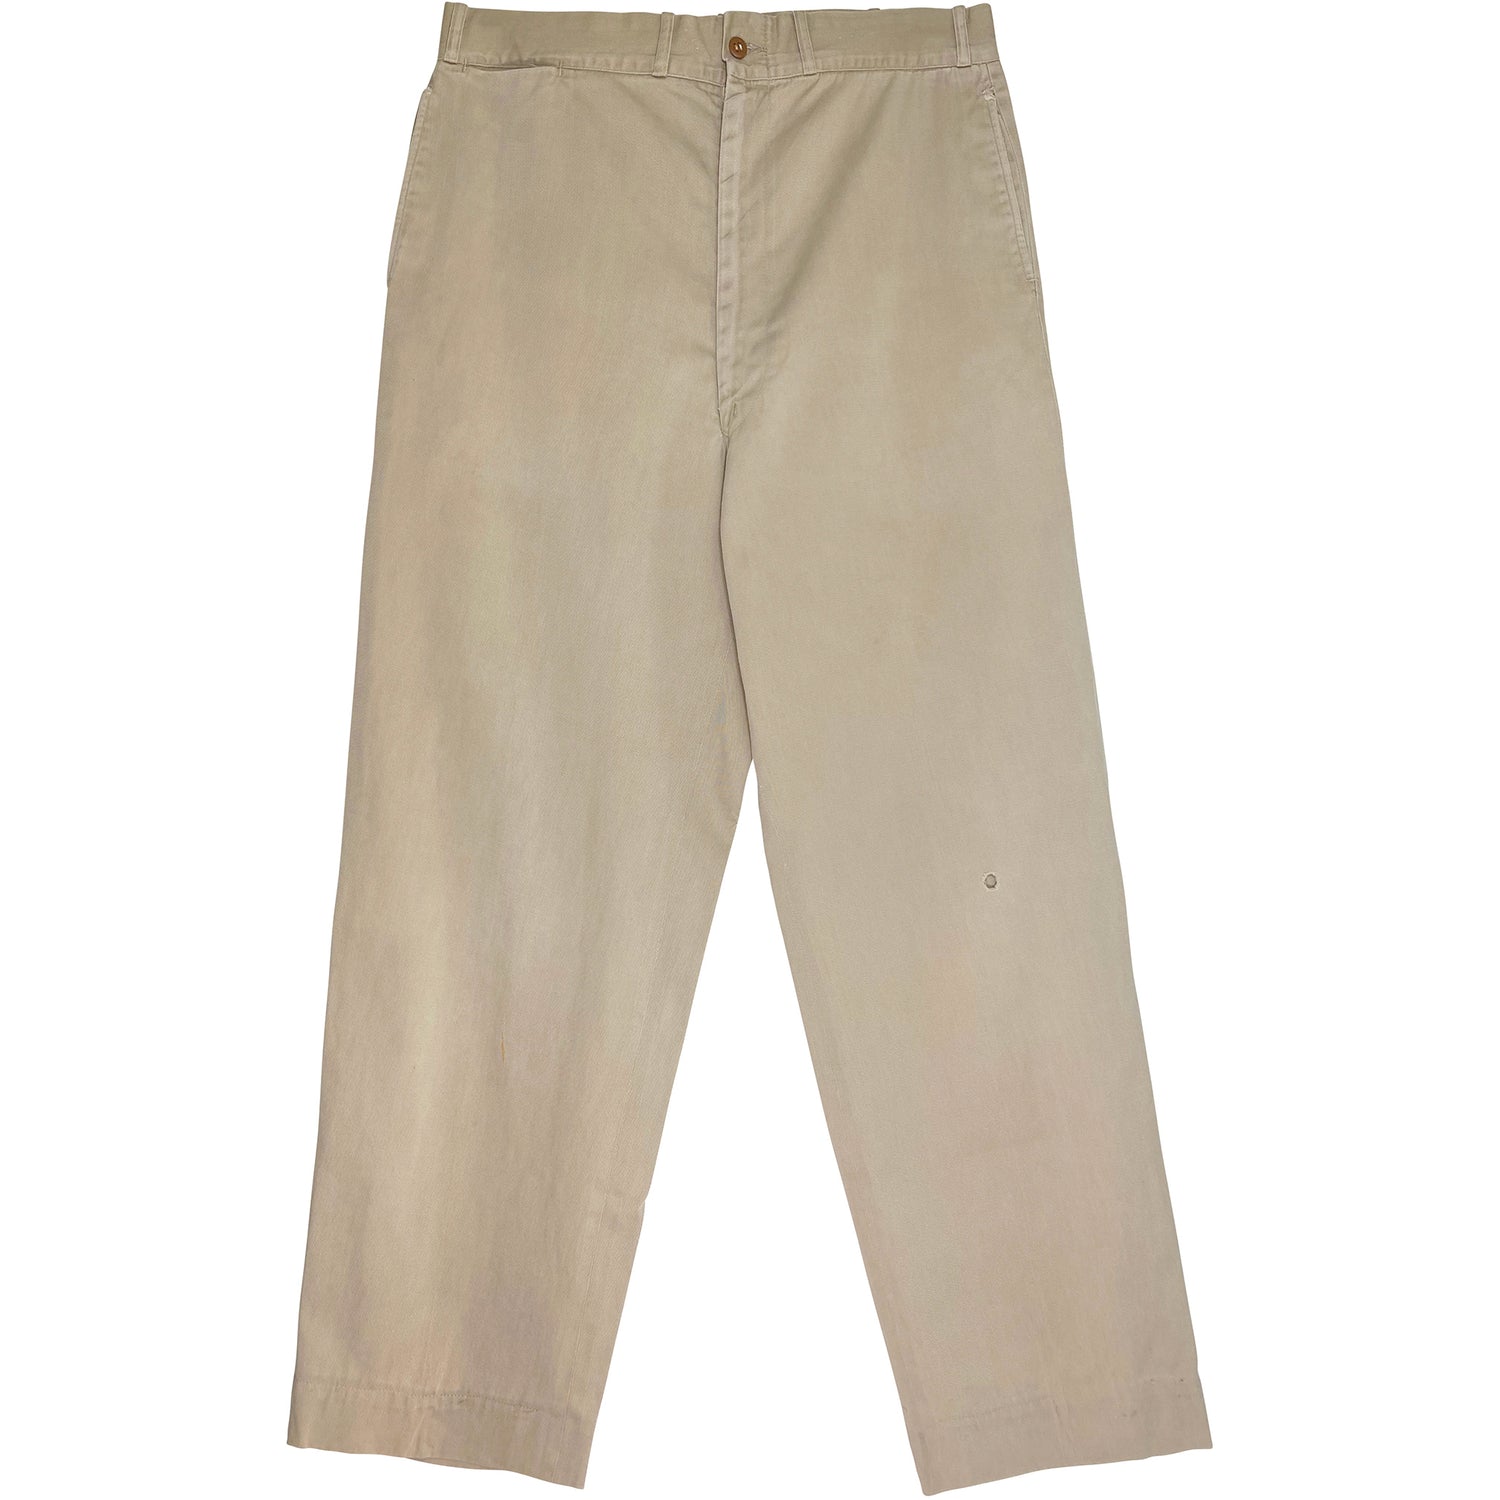 VINTAGE BEAT UP CHINOS - Size 32